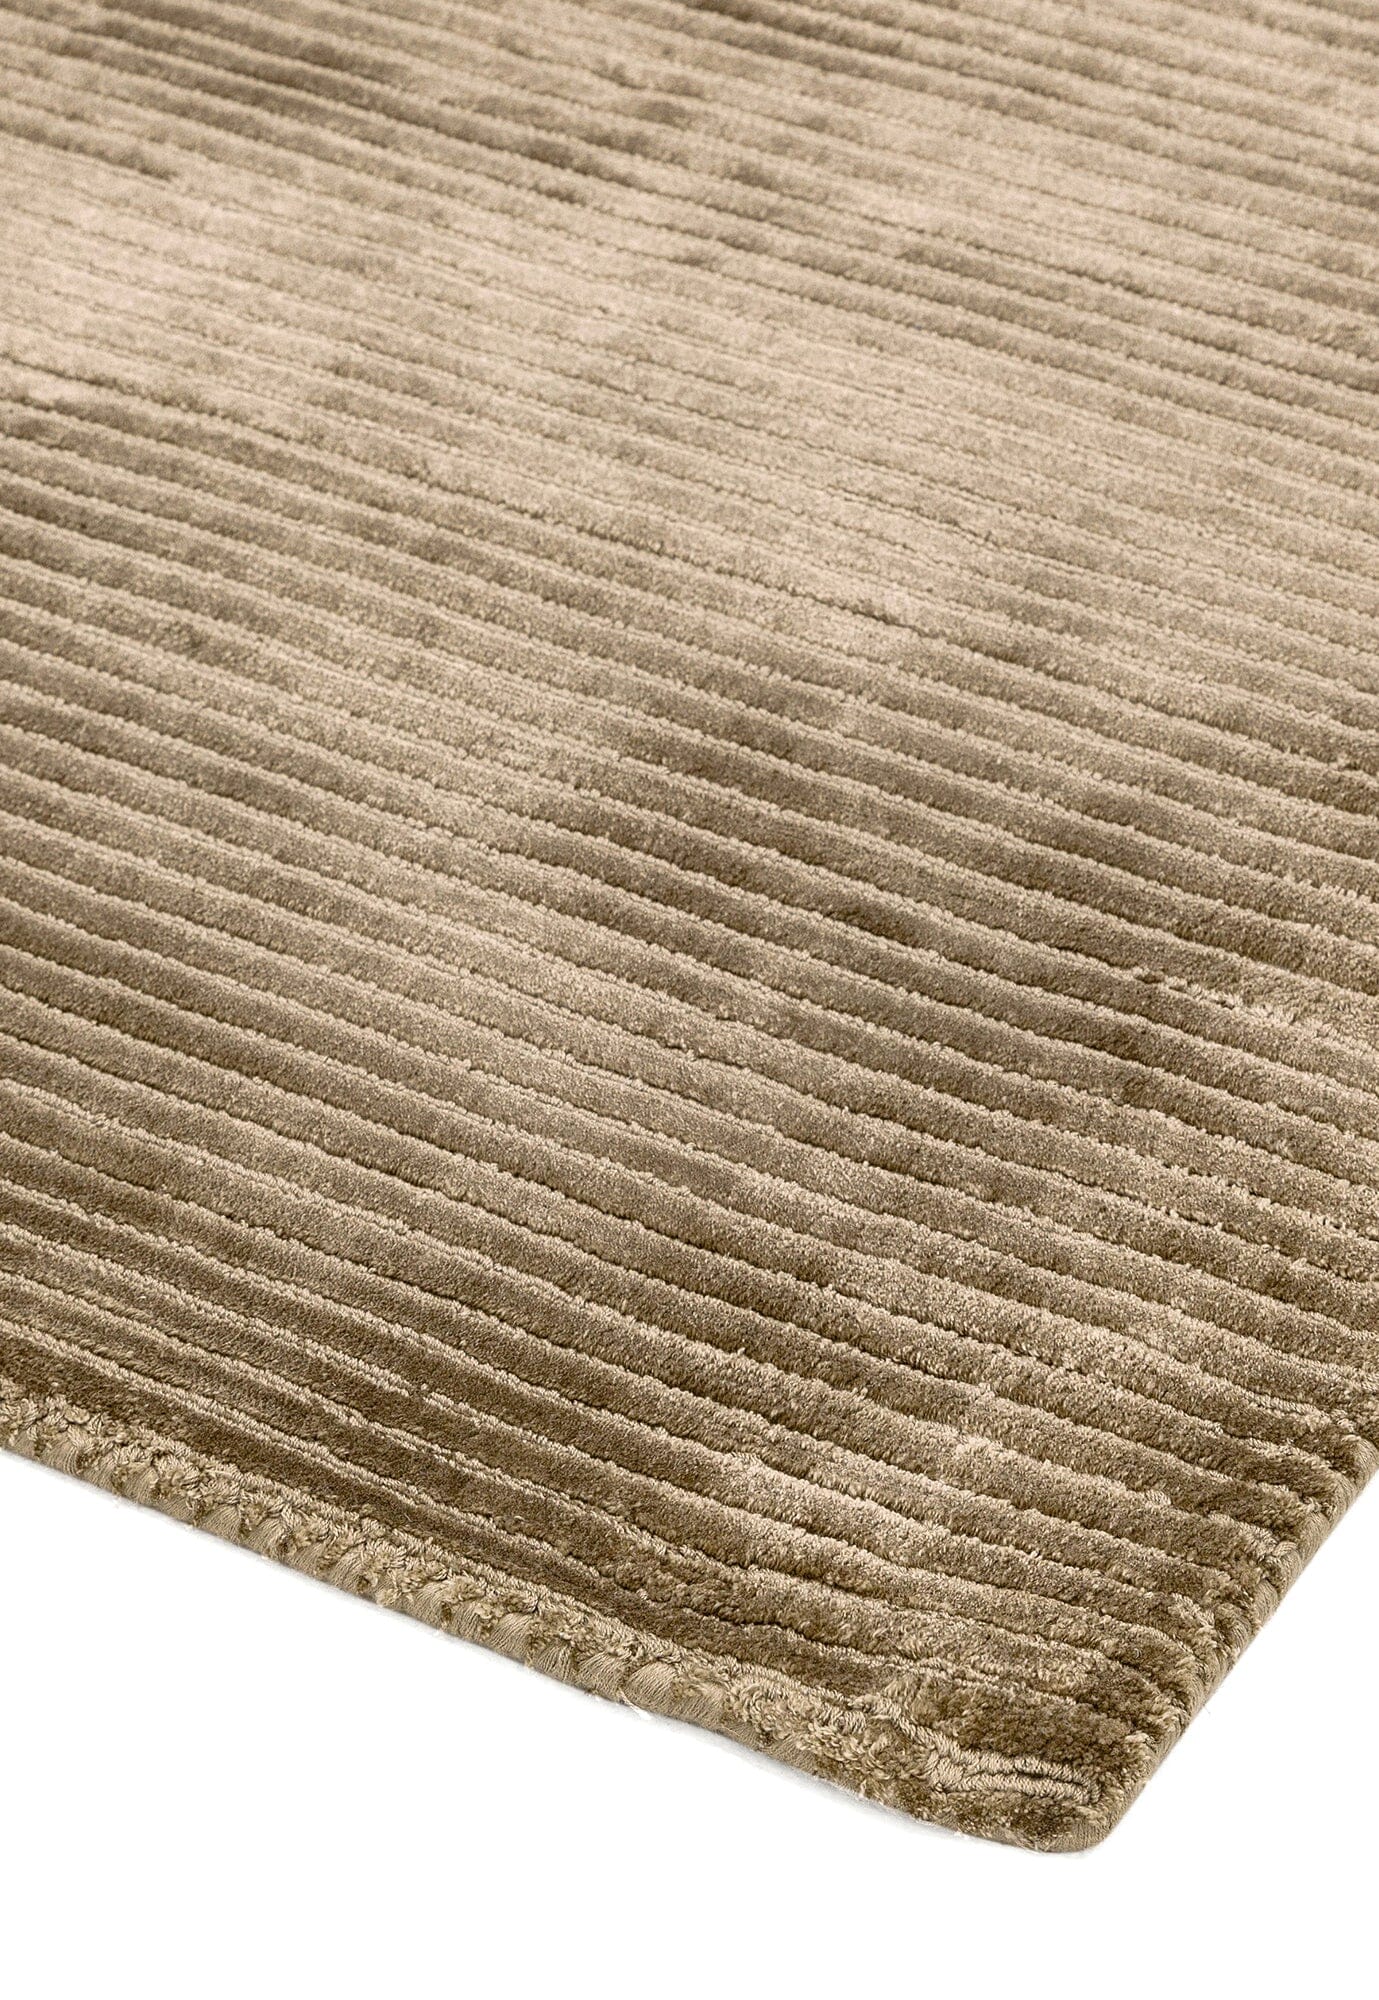 Asiatic Carpets Bellagio Hand Woven Rug Taupe - 160 x 230cm